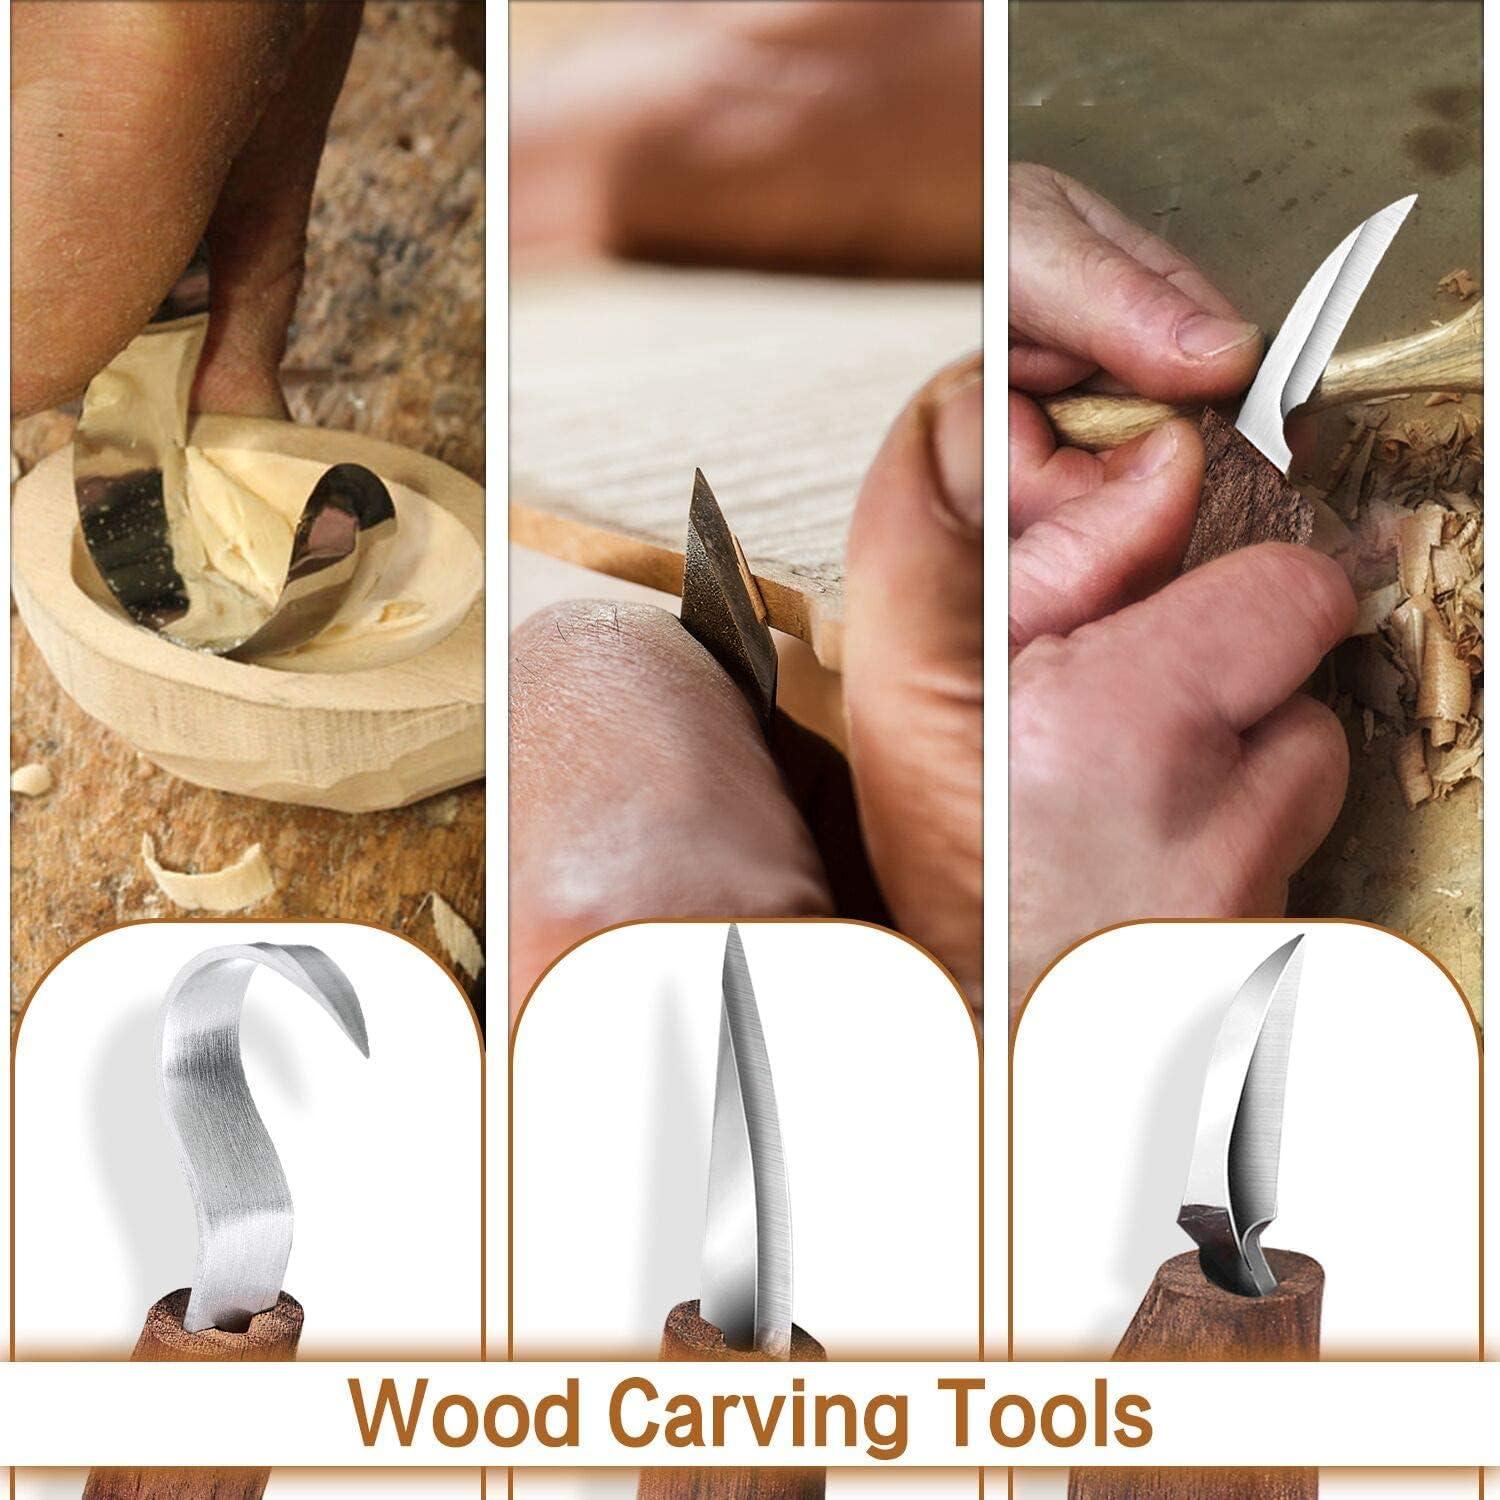 Wood Carving Tools 7 in 1 Wood Carving Kit with Carving Hook Knife Wood Whittling  Knife Chip Carving Knife Gloves Carving Knife Sharpener for Beginners  Woodworking kit Brown 7 in 1